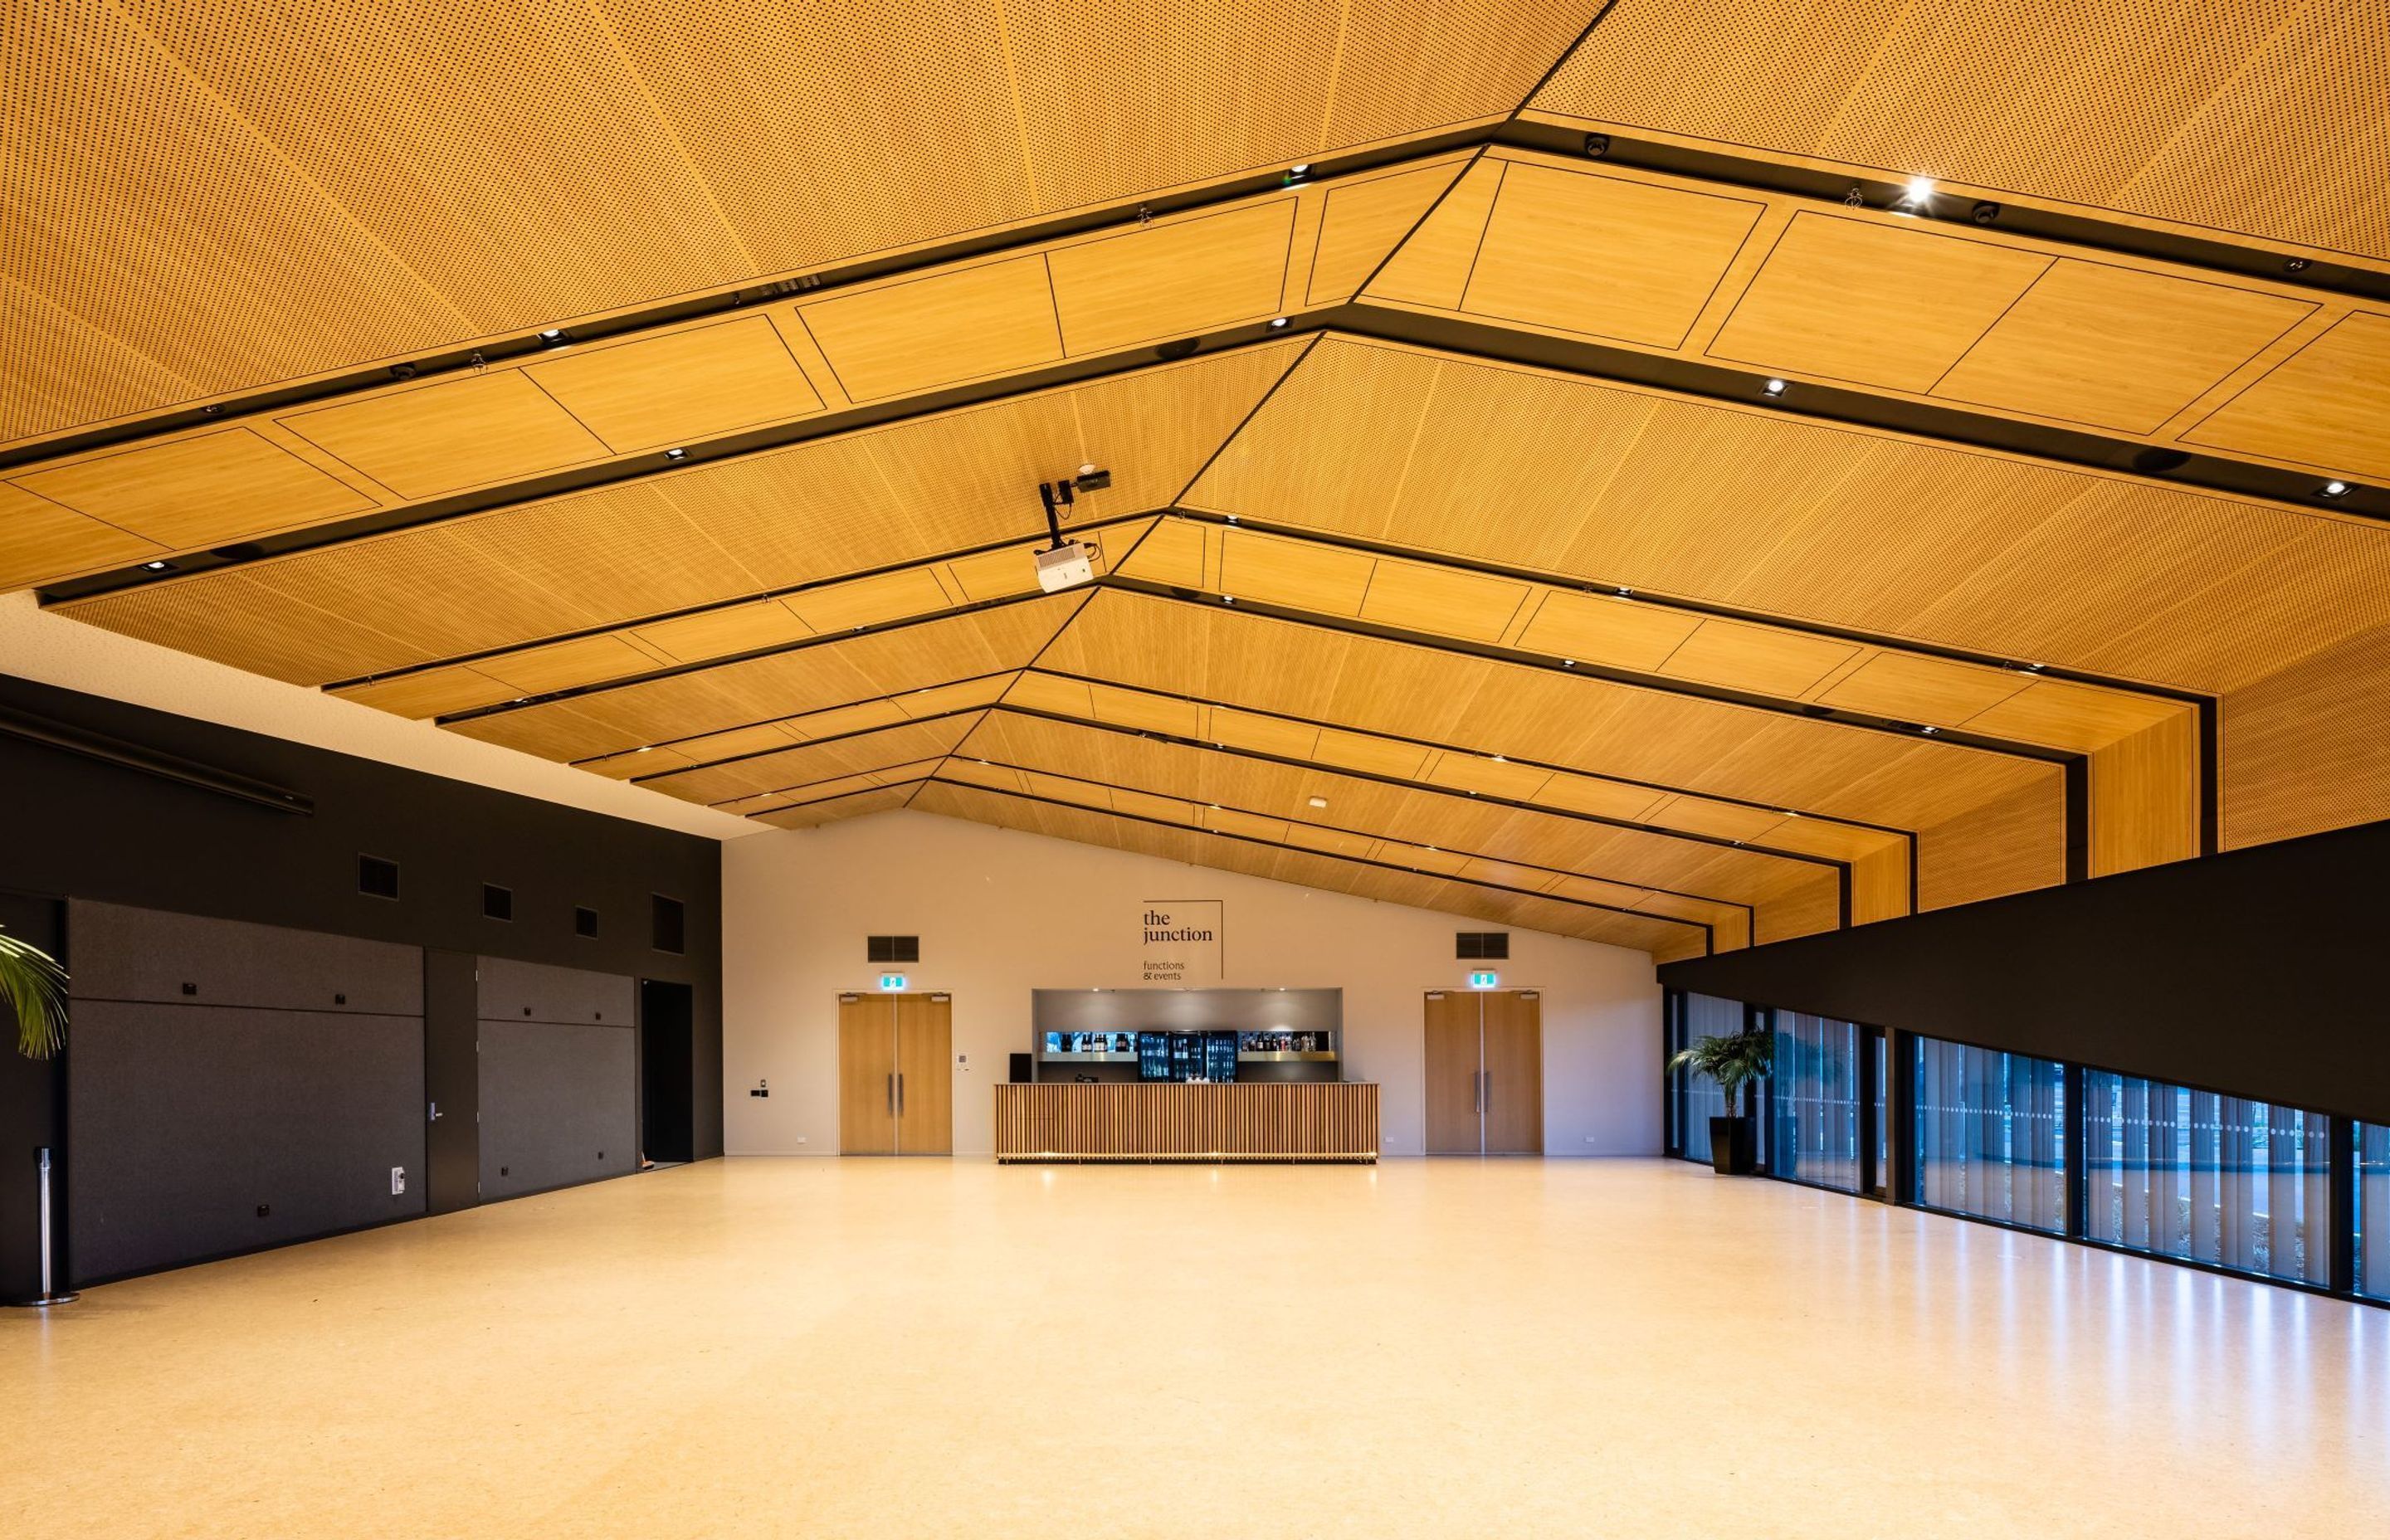 Prime Melamine in Original Oak was perforated to create additional interest for the ceilings